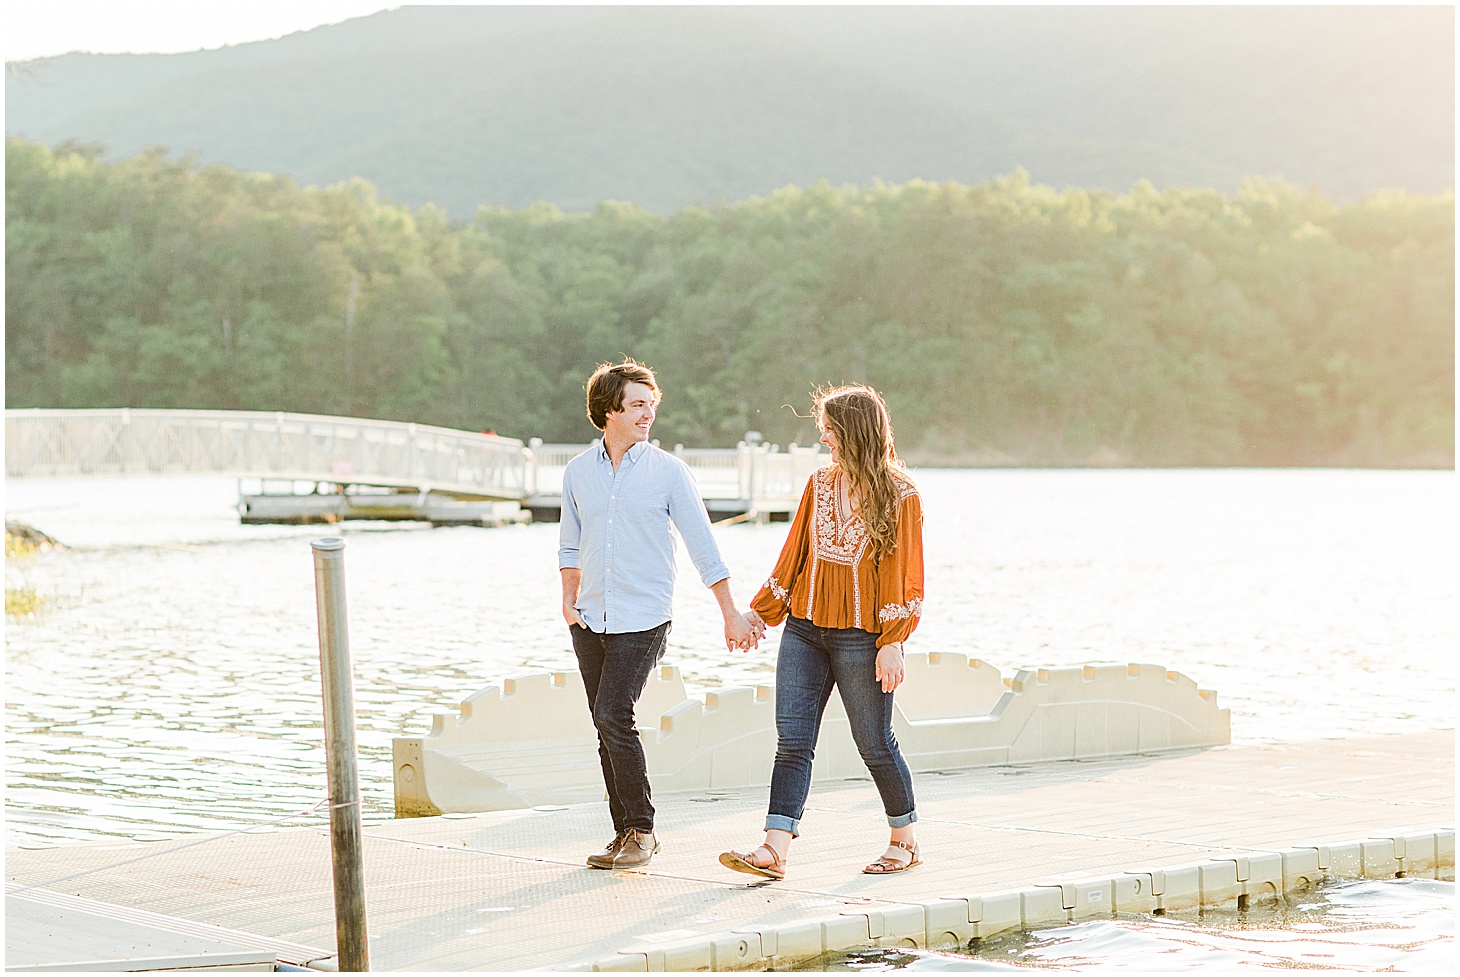 carvinscoveengagementsession_roanokeengagementsession_carvinscove_virginiawedding_virginiaweddingphotographer_vaweddingphotographer_photo_0025.jpg